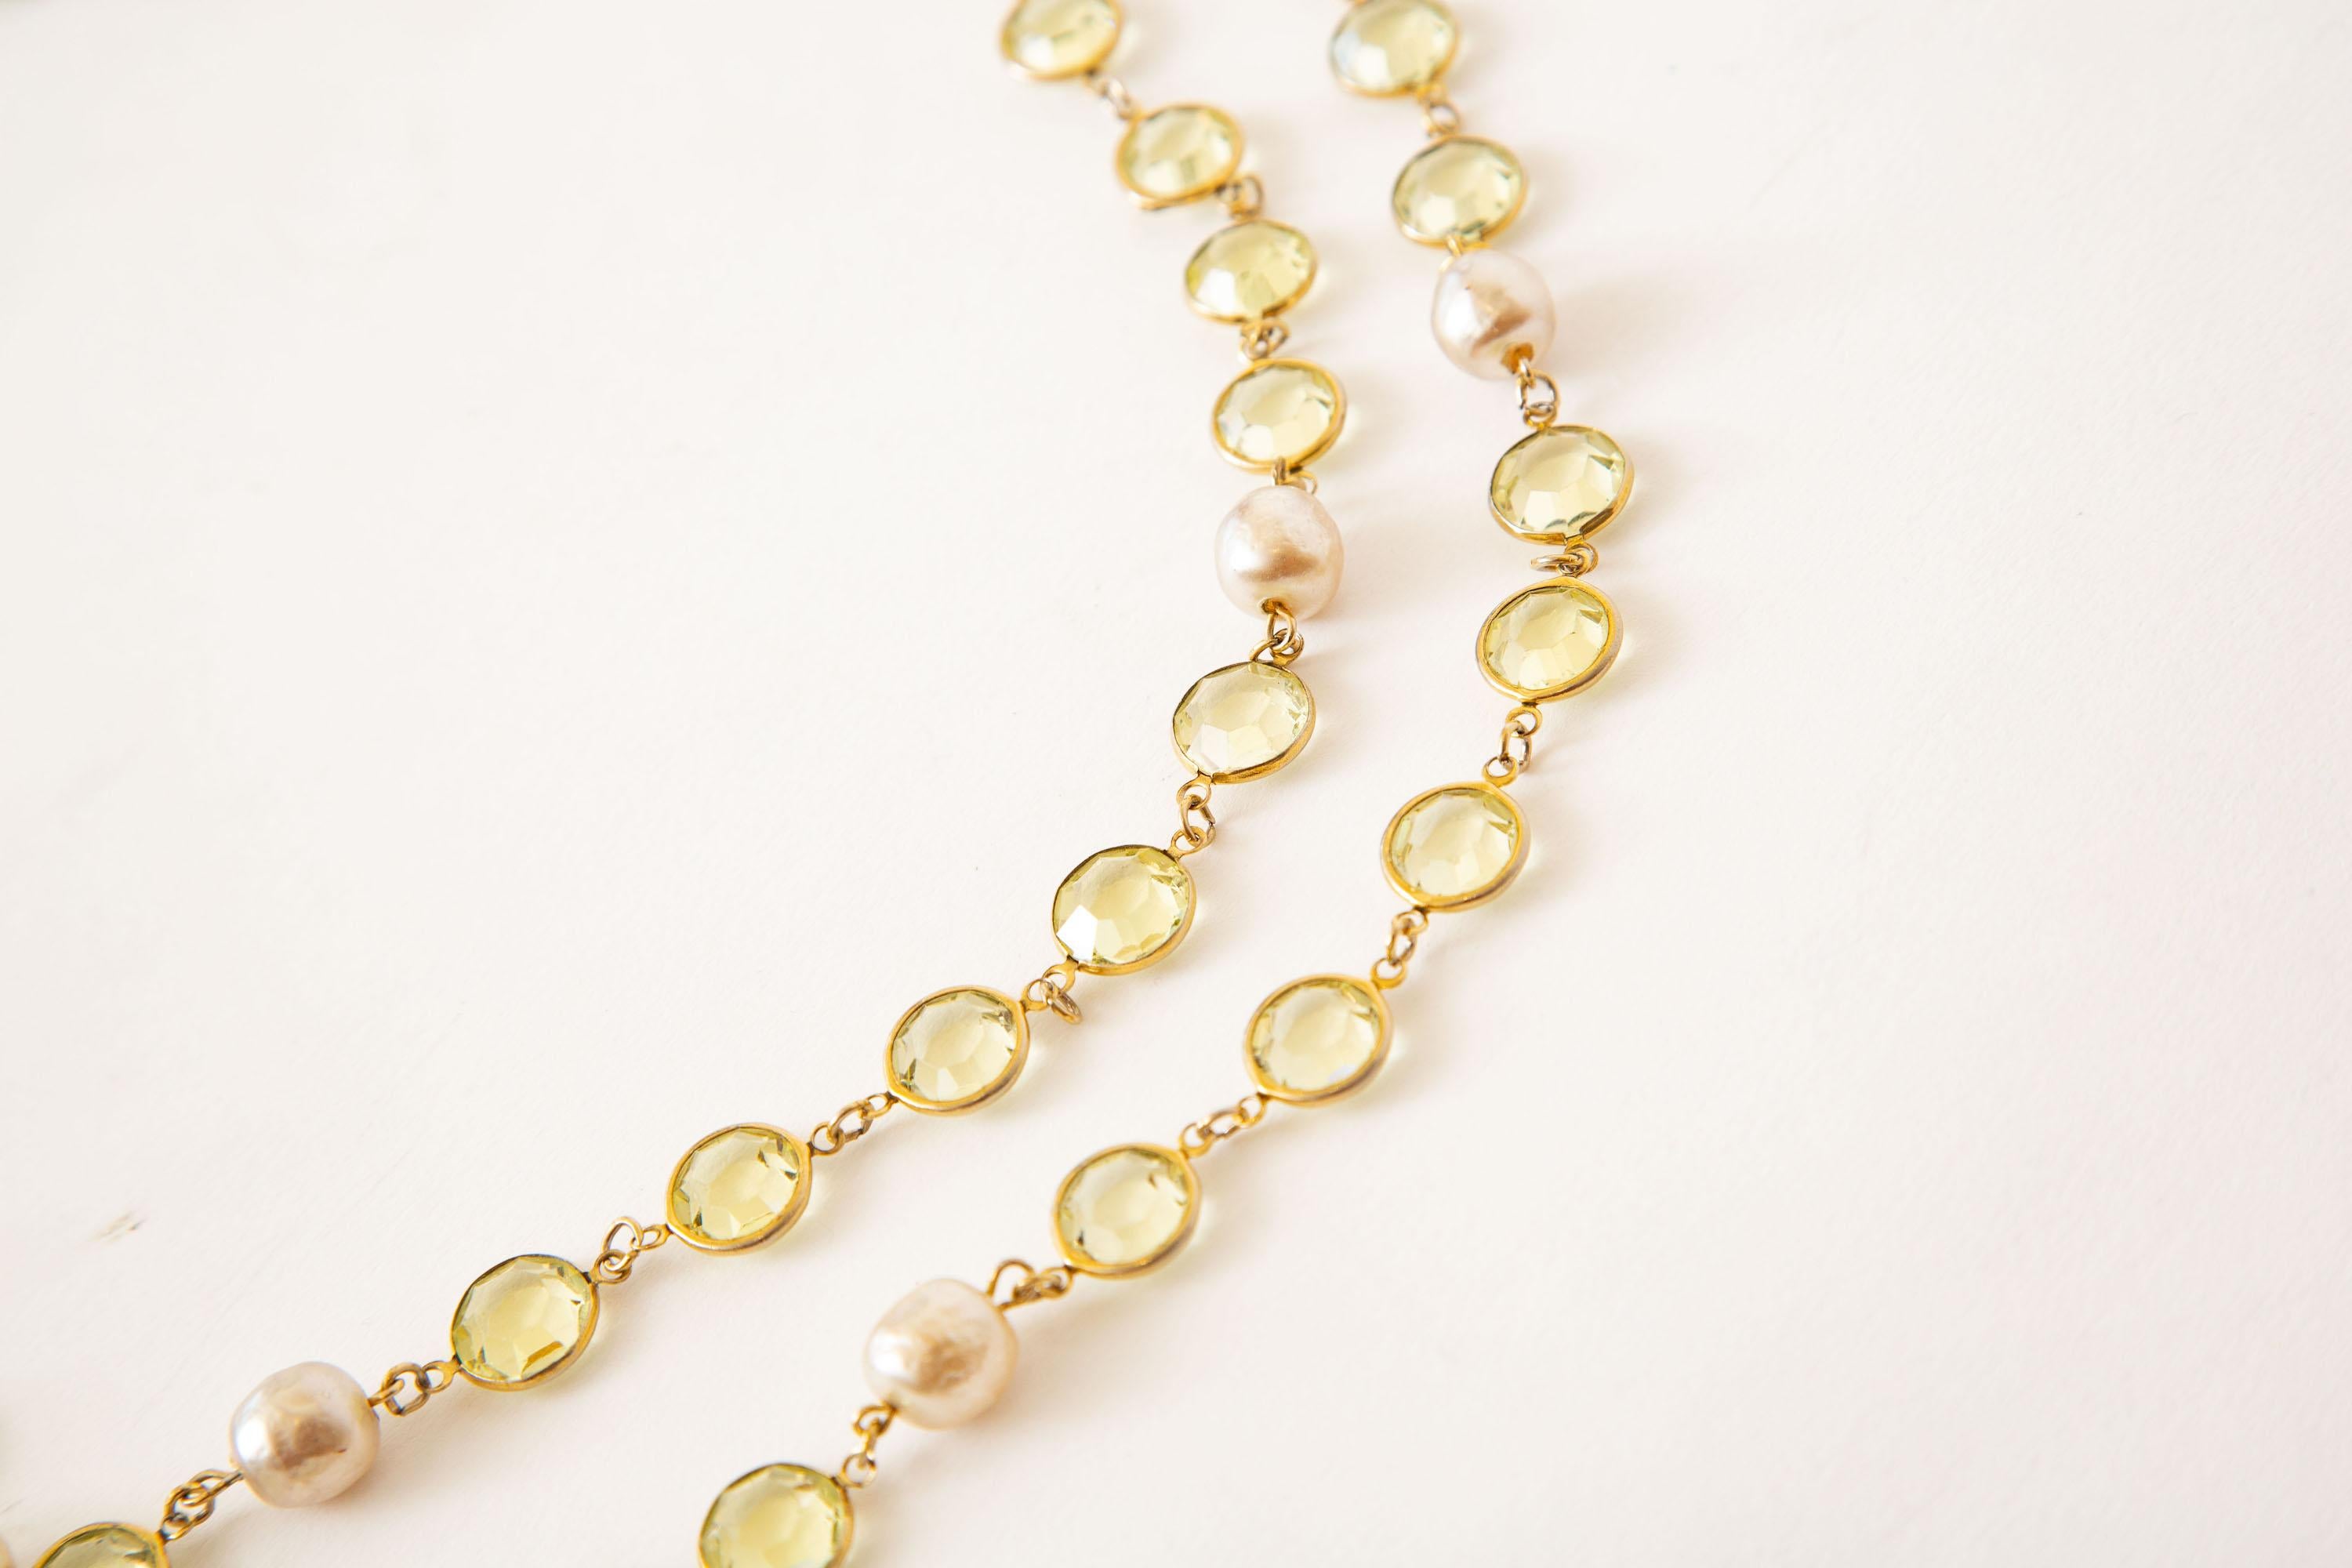 Vintage Chanel Chartreuse Beveled Crystals And Faux Pearl Sautoir Wrap Necklace 1